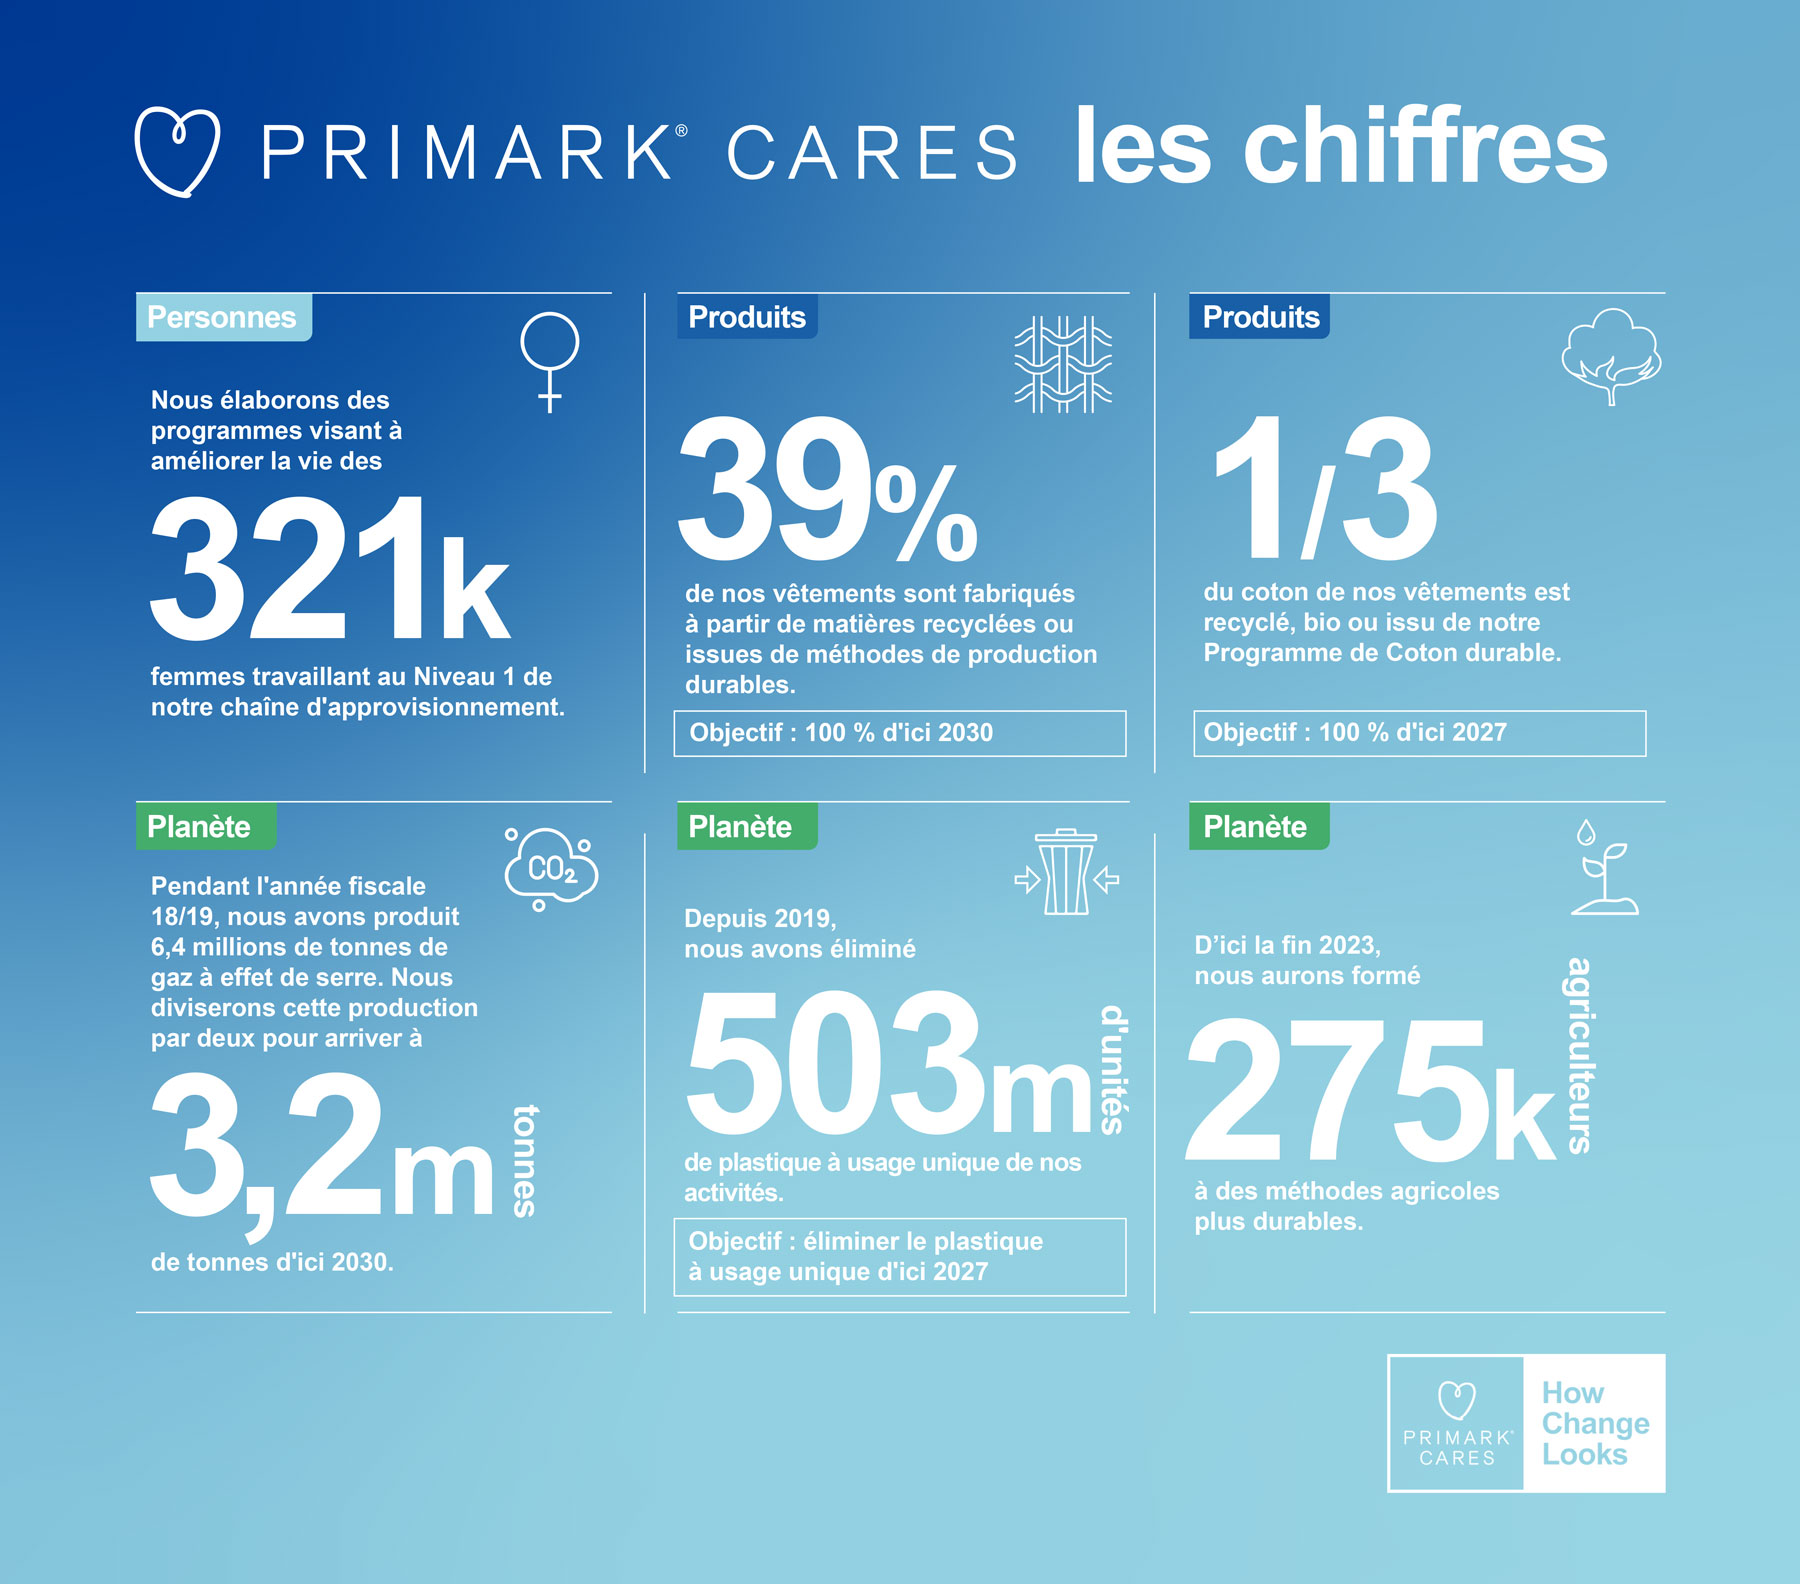 The Image displays an Infographic showing how Primark Cares In Numbers